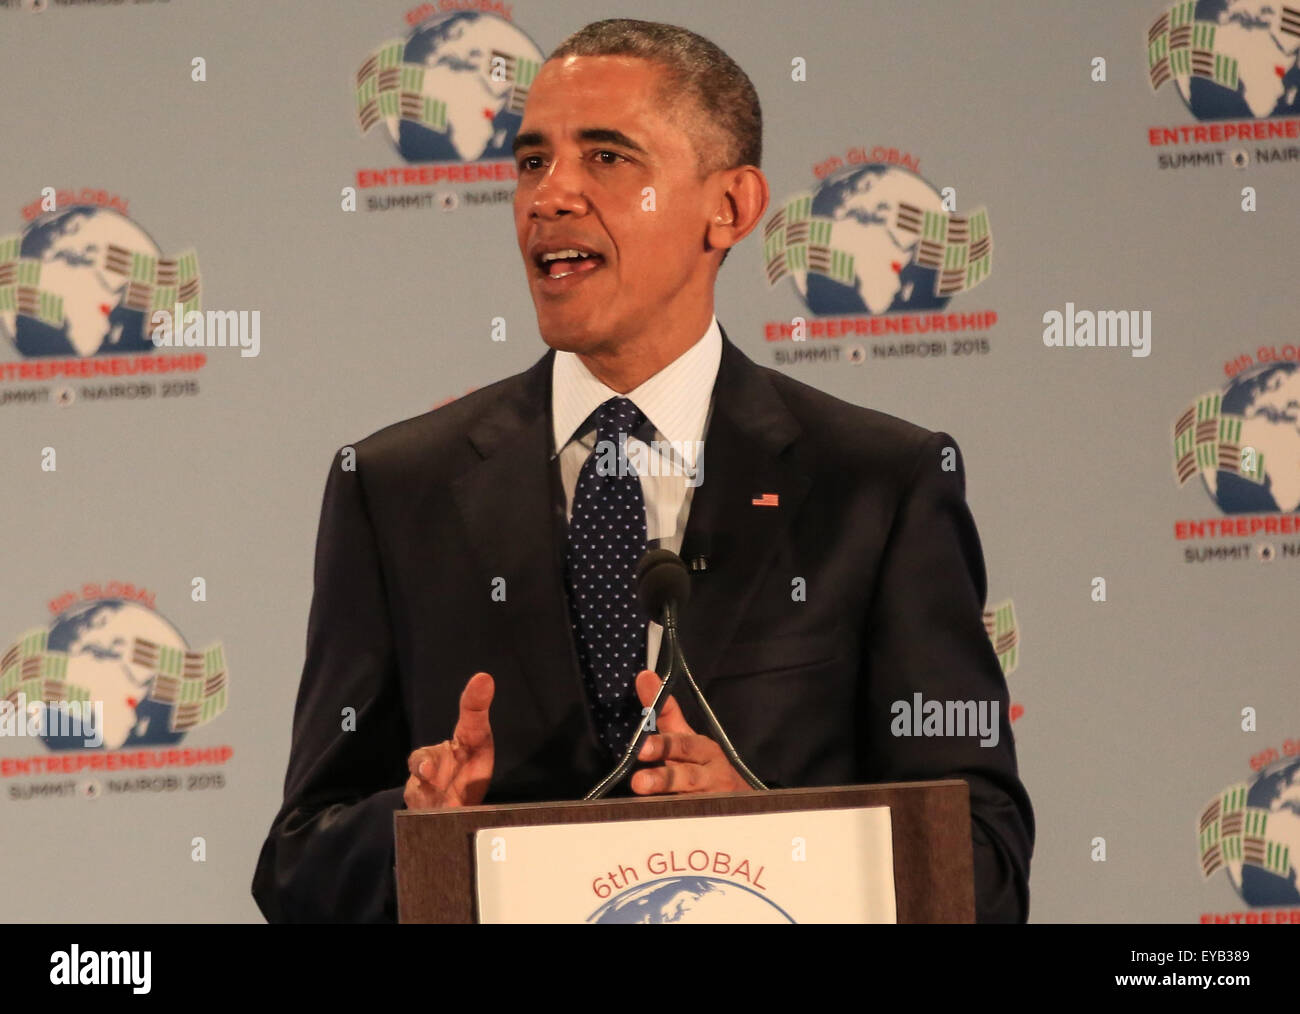 Kenya. 25th July, 2015. US President Barack Obama delivers a speech during the official opening of the 6th Global Entrepreneurship Summit (GES), at the UNEP Headquarters in Nairobi, Kenyan capital. Obama is on his three day visit to the country, his first visit to his father's homeland since becoming president. He promoted Africa as a hub for global economic growth during a four-day state visit to Kenya and Ethiopia to address terrorism, economic recovery and human rights. © Tom Maruko/Pacific Press/Alamy Live News Stock Photo